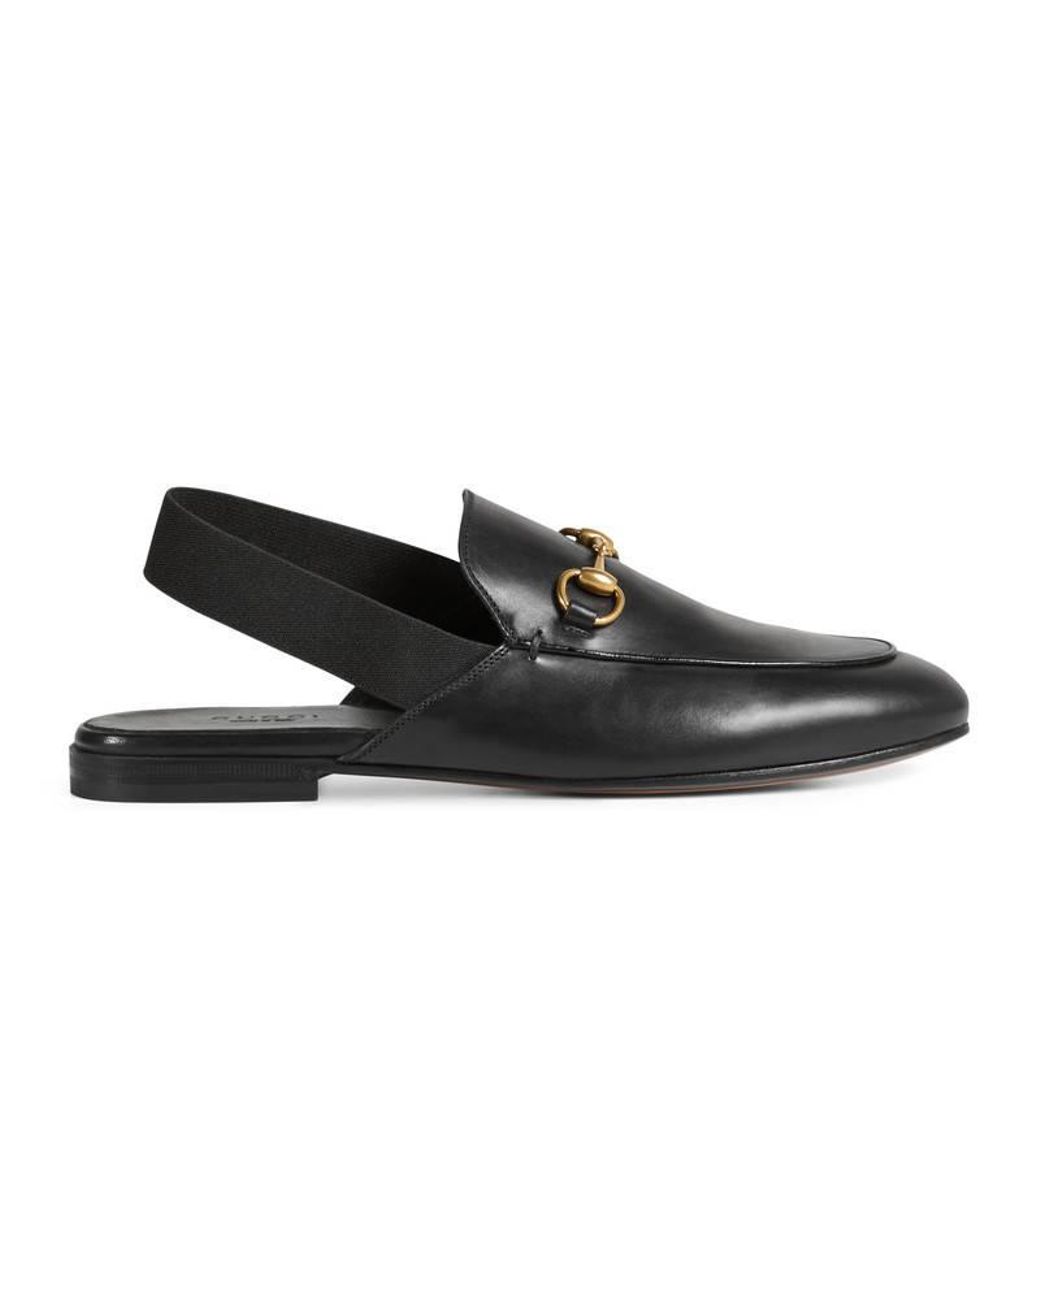 Gucci Leather Horsebit Slingback Loafer in Black | Lyst